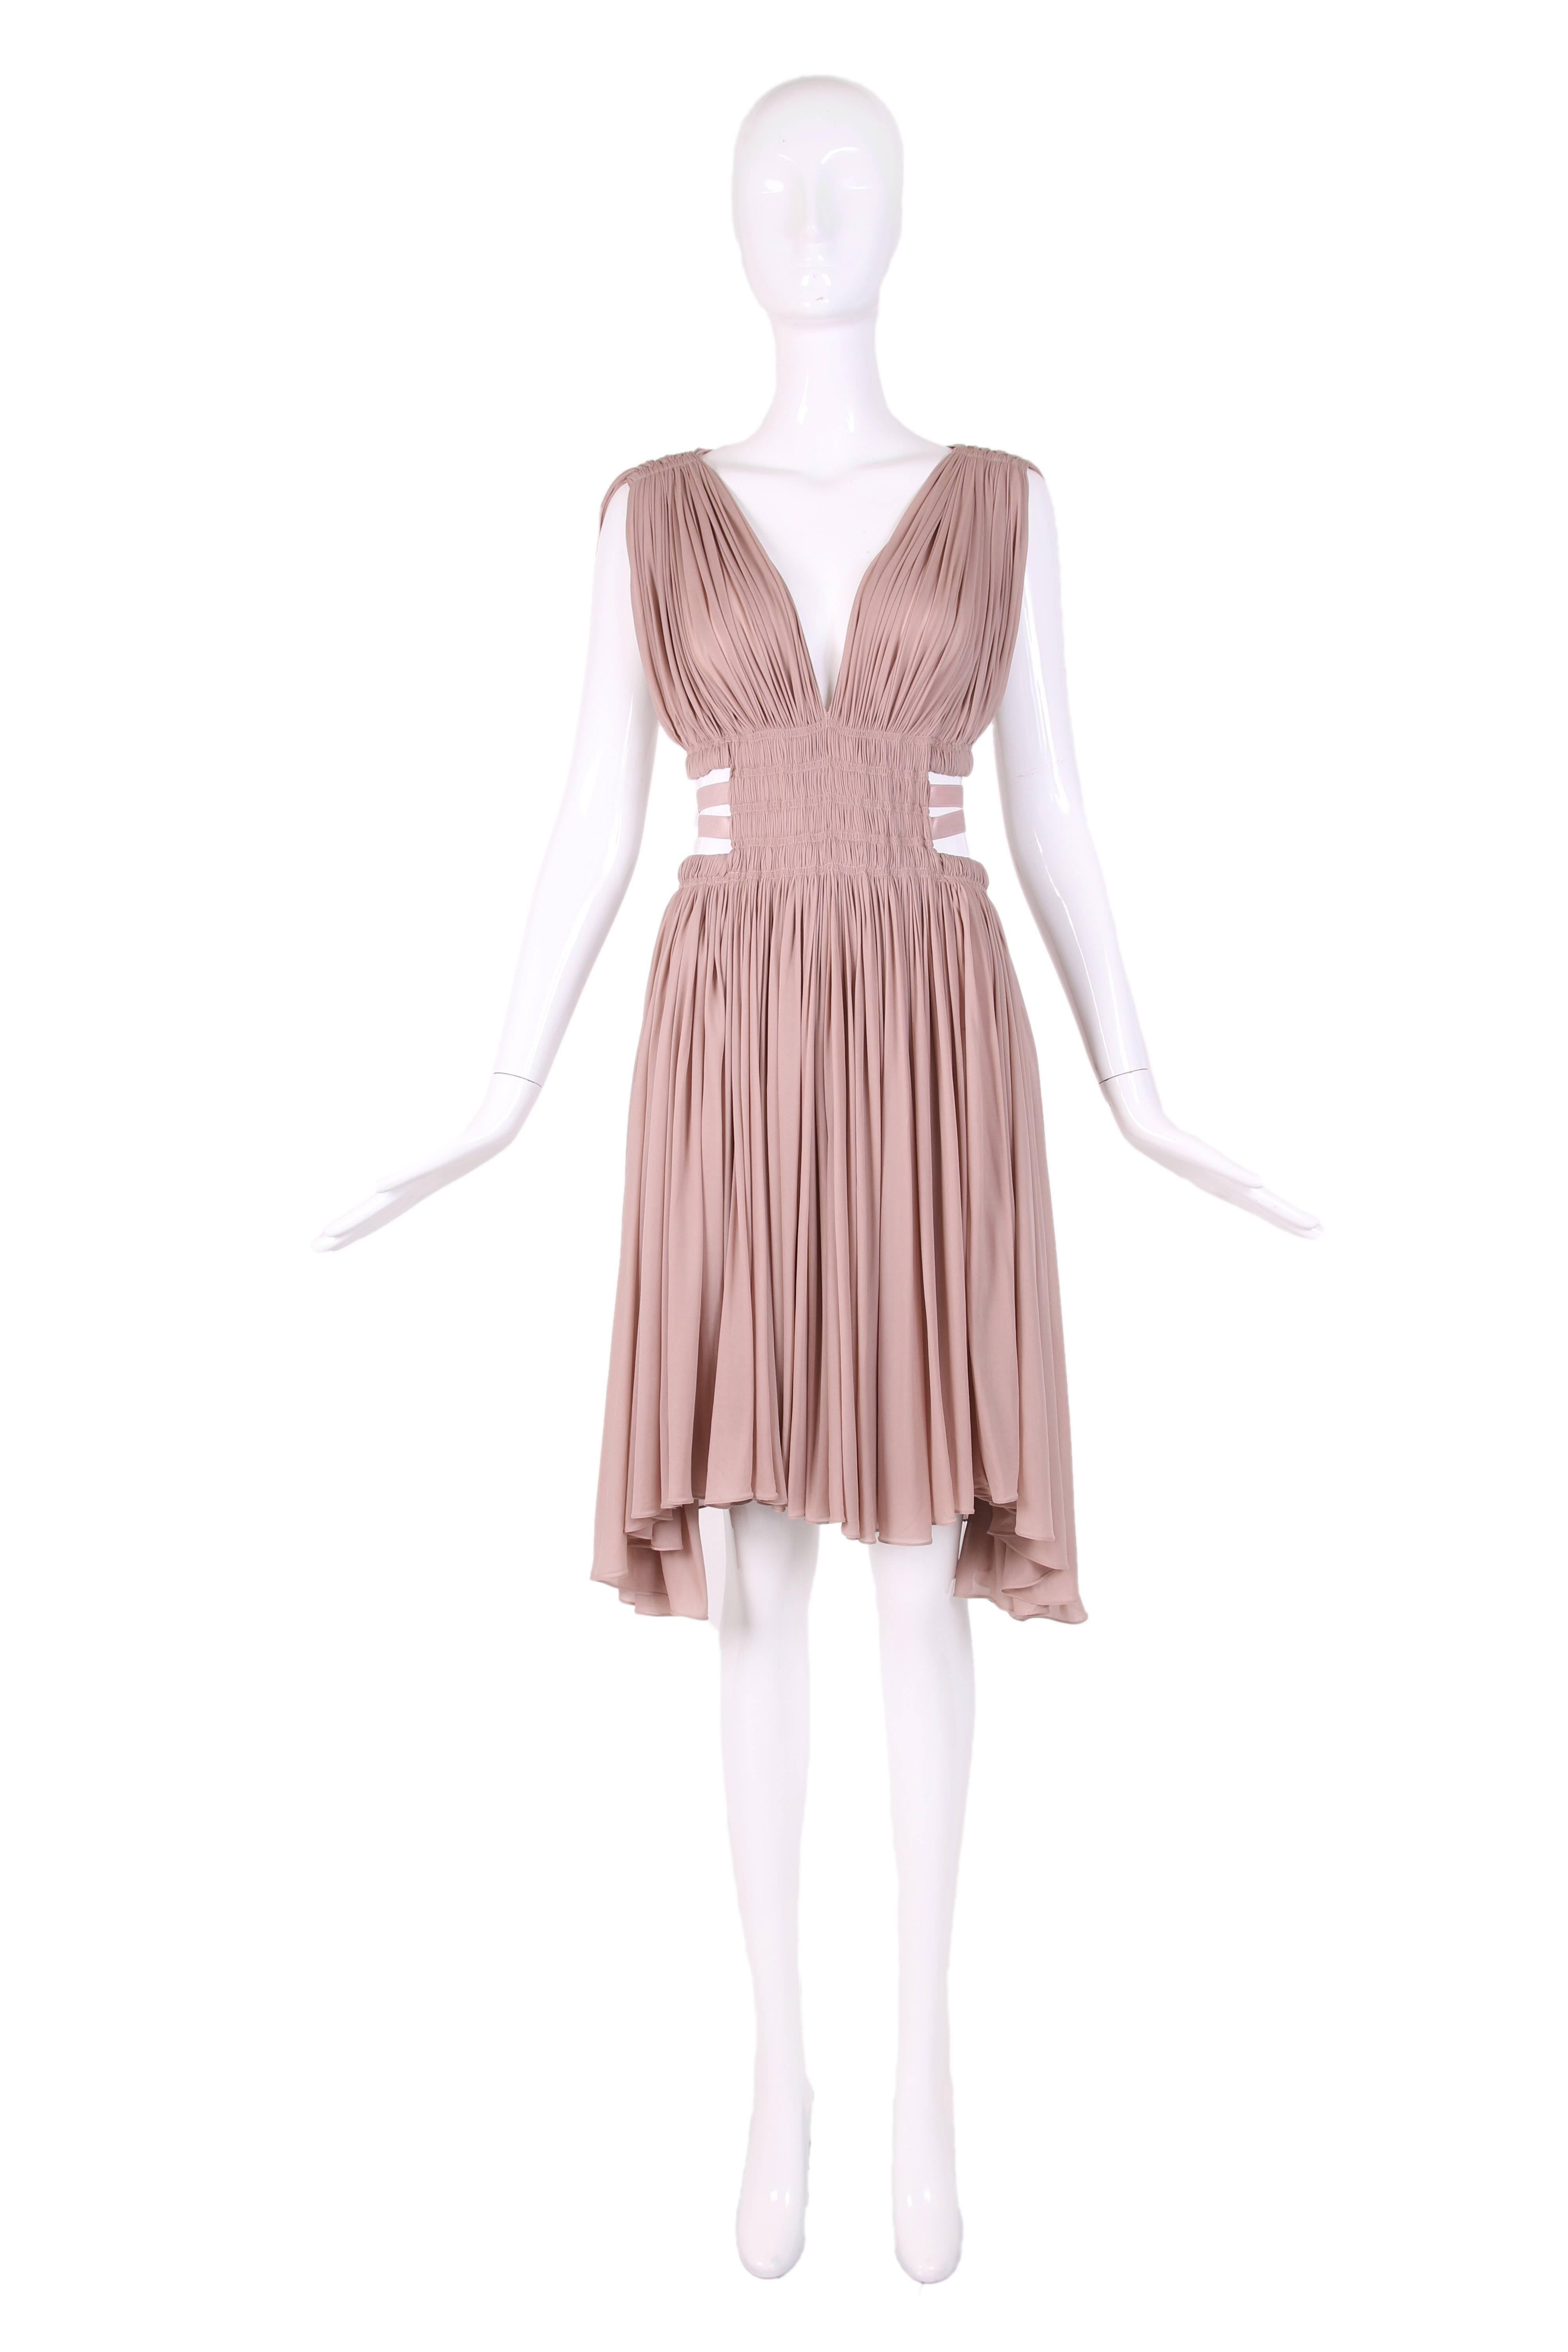 Alaia blush pink mini dress with Grecian draping and gathers. There are there are cut-outs at the waist line with 3 elastic bands that hug the sides, waistline and back. The dress in done in a cupro fabric which is cotton with the hand of a silk